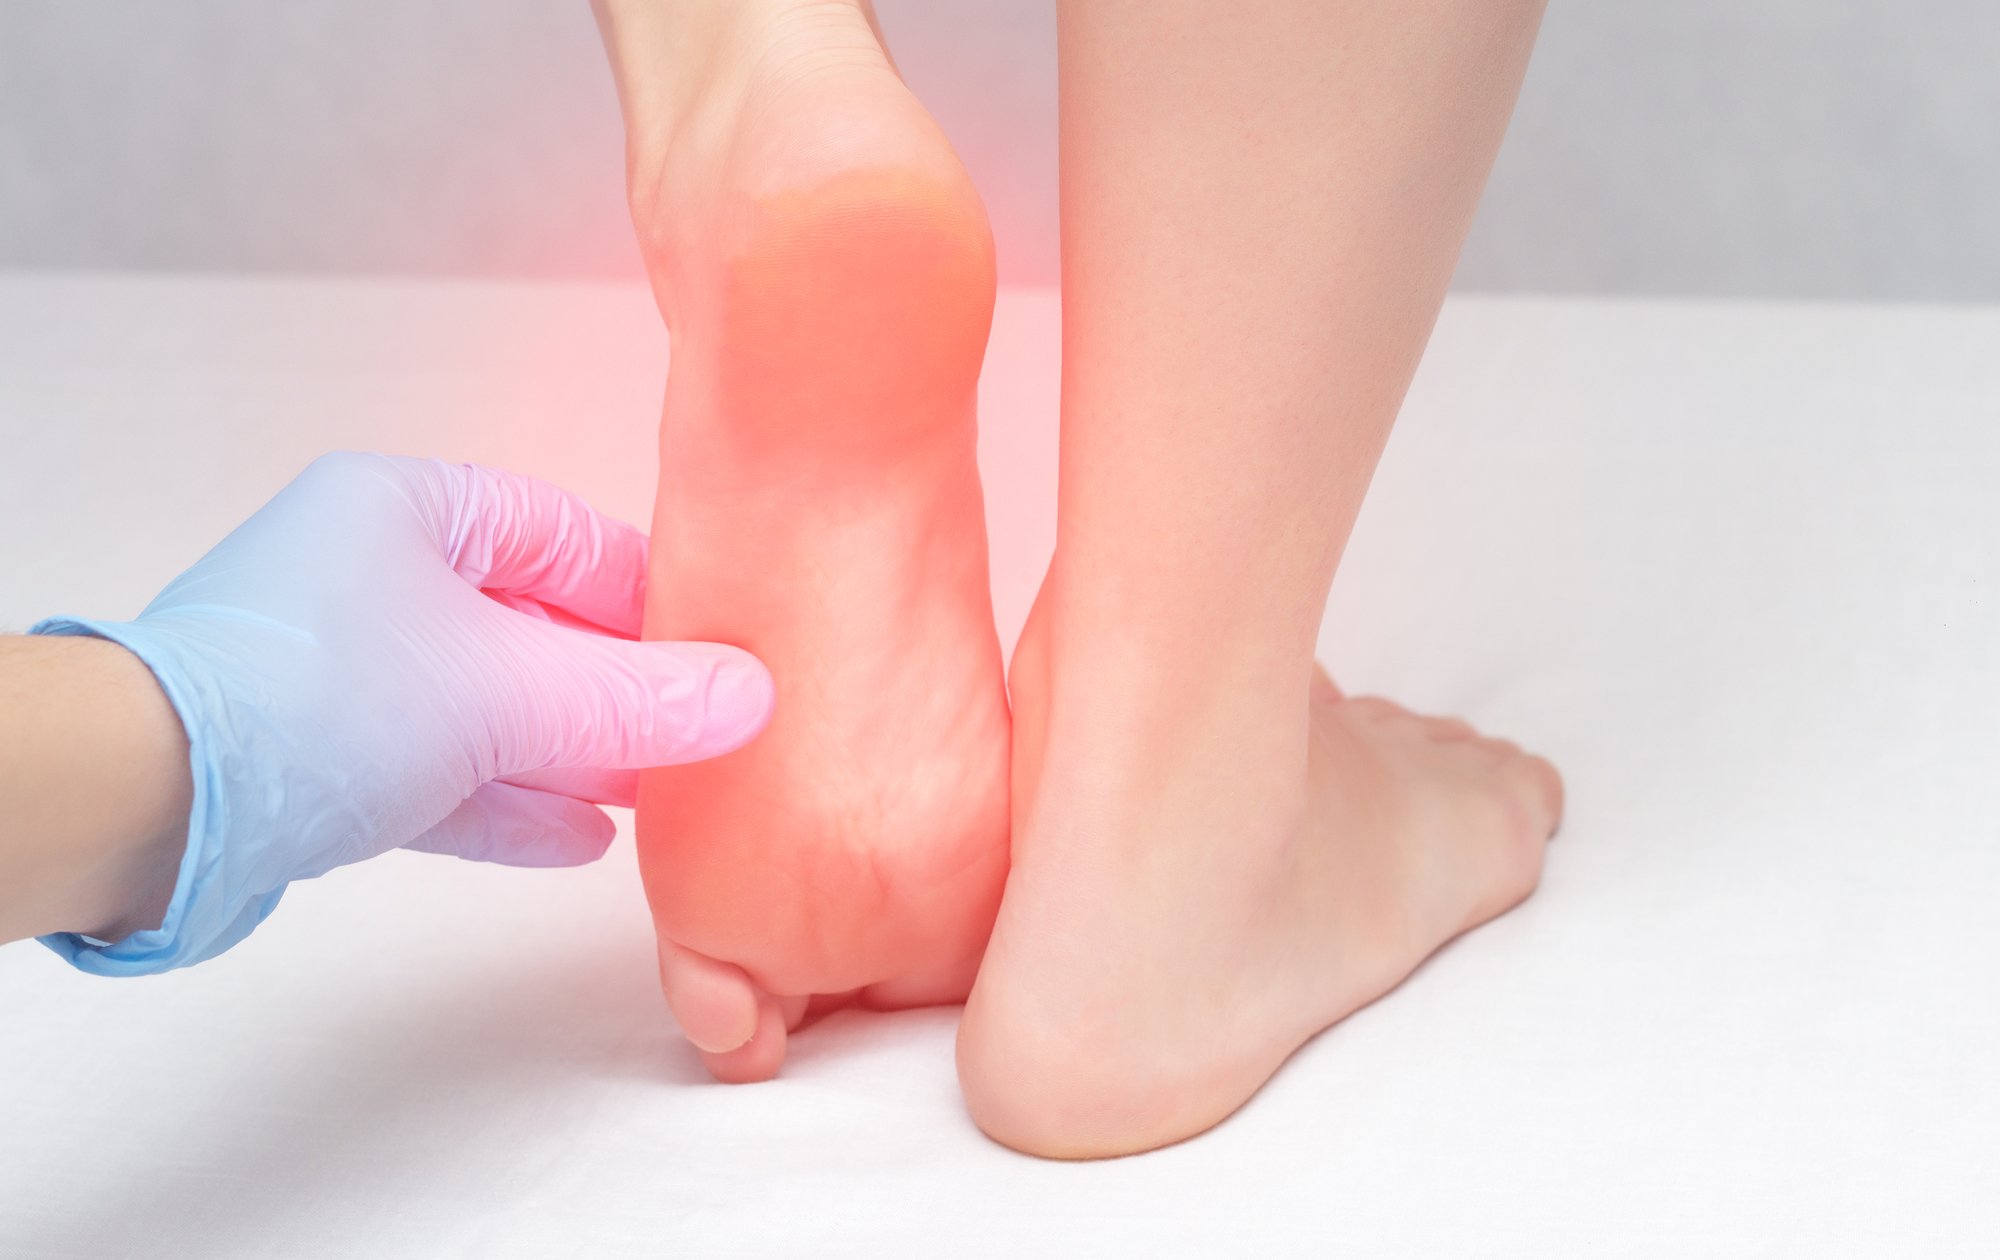 Heel Pain: Causes, Symptoms, and Treatment Options